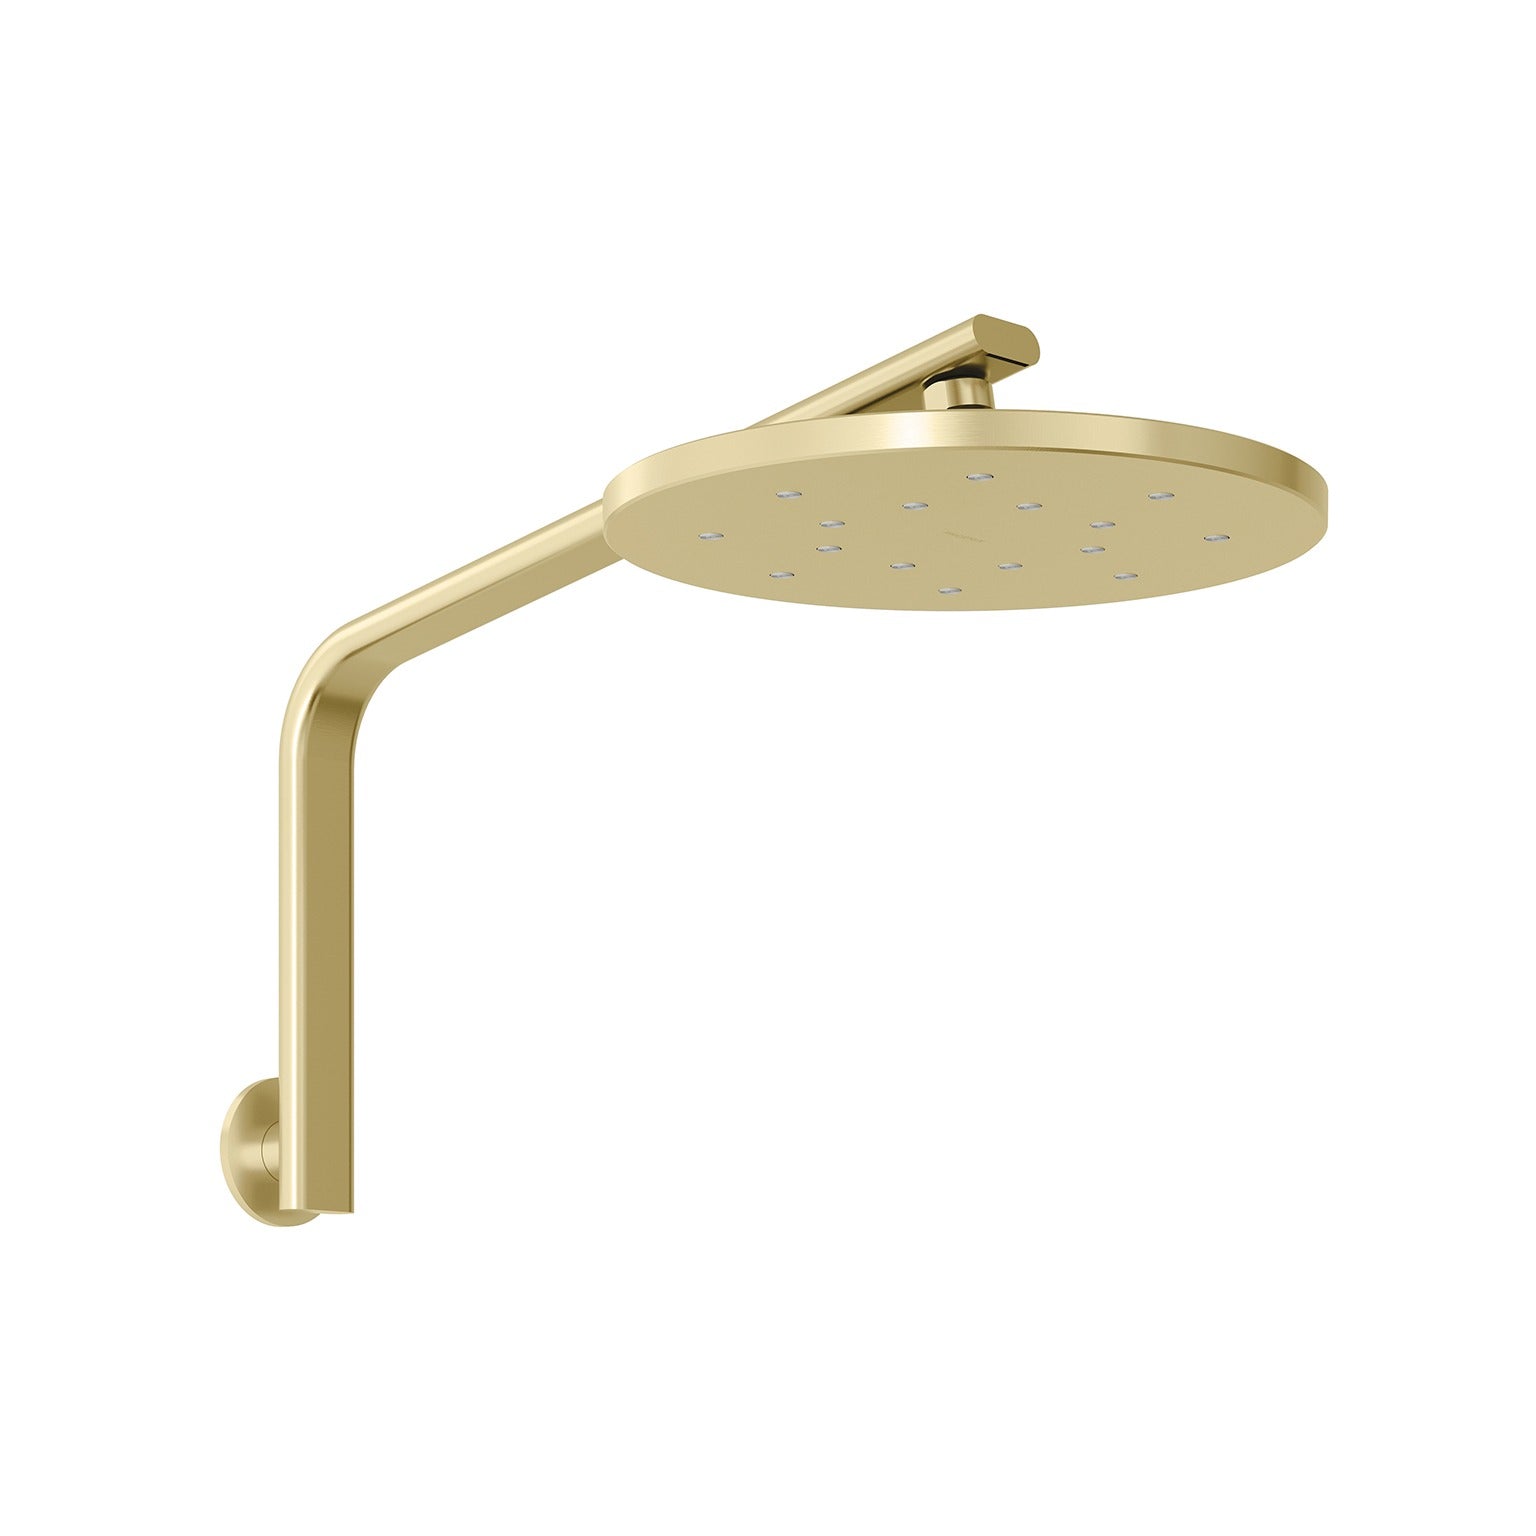 PHOENIX OXLEY HIGH-RISE SHOWER ARM AND ROSE BRUSHED GOLD